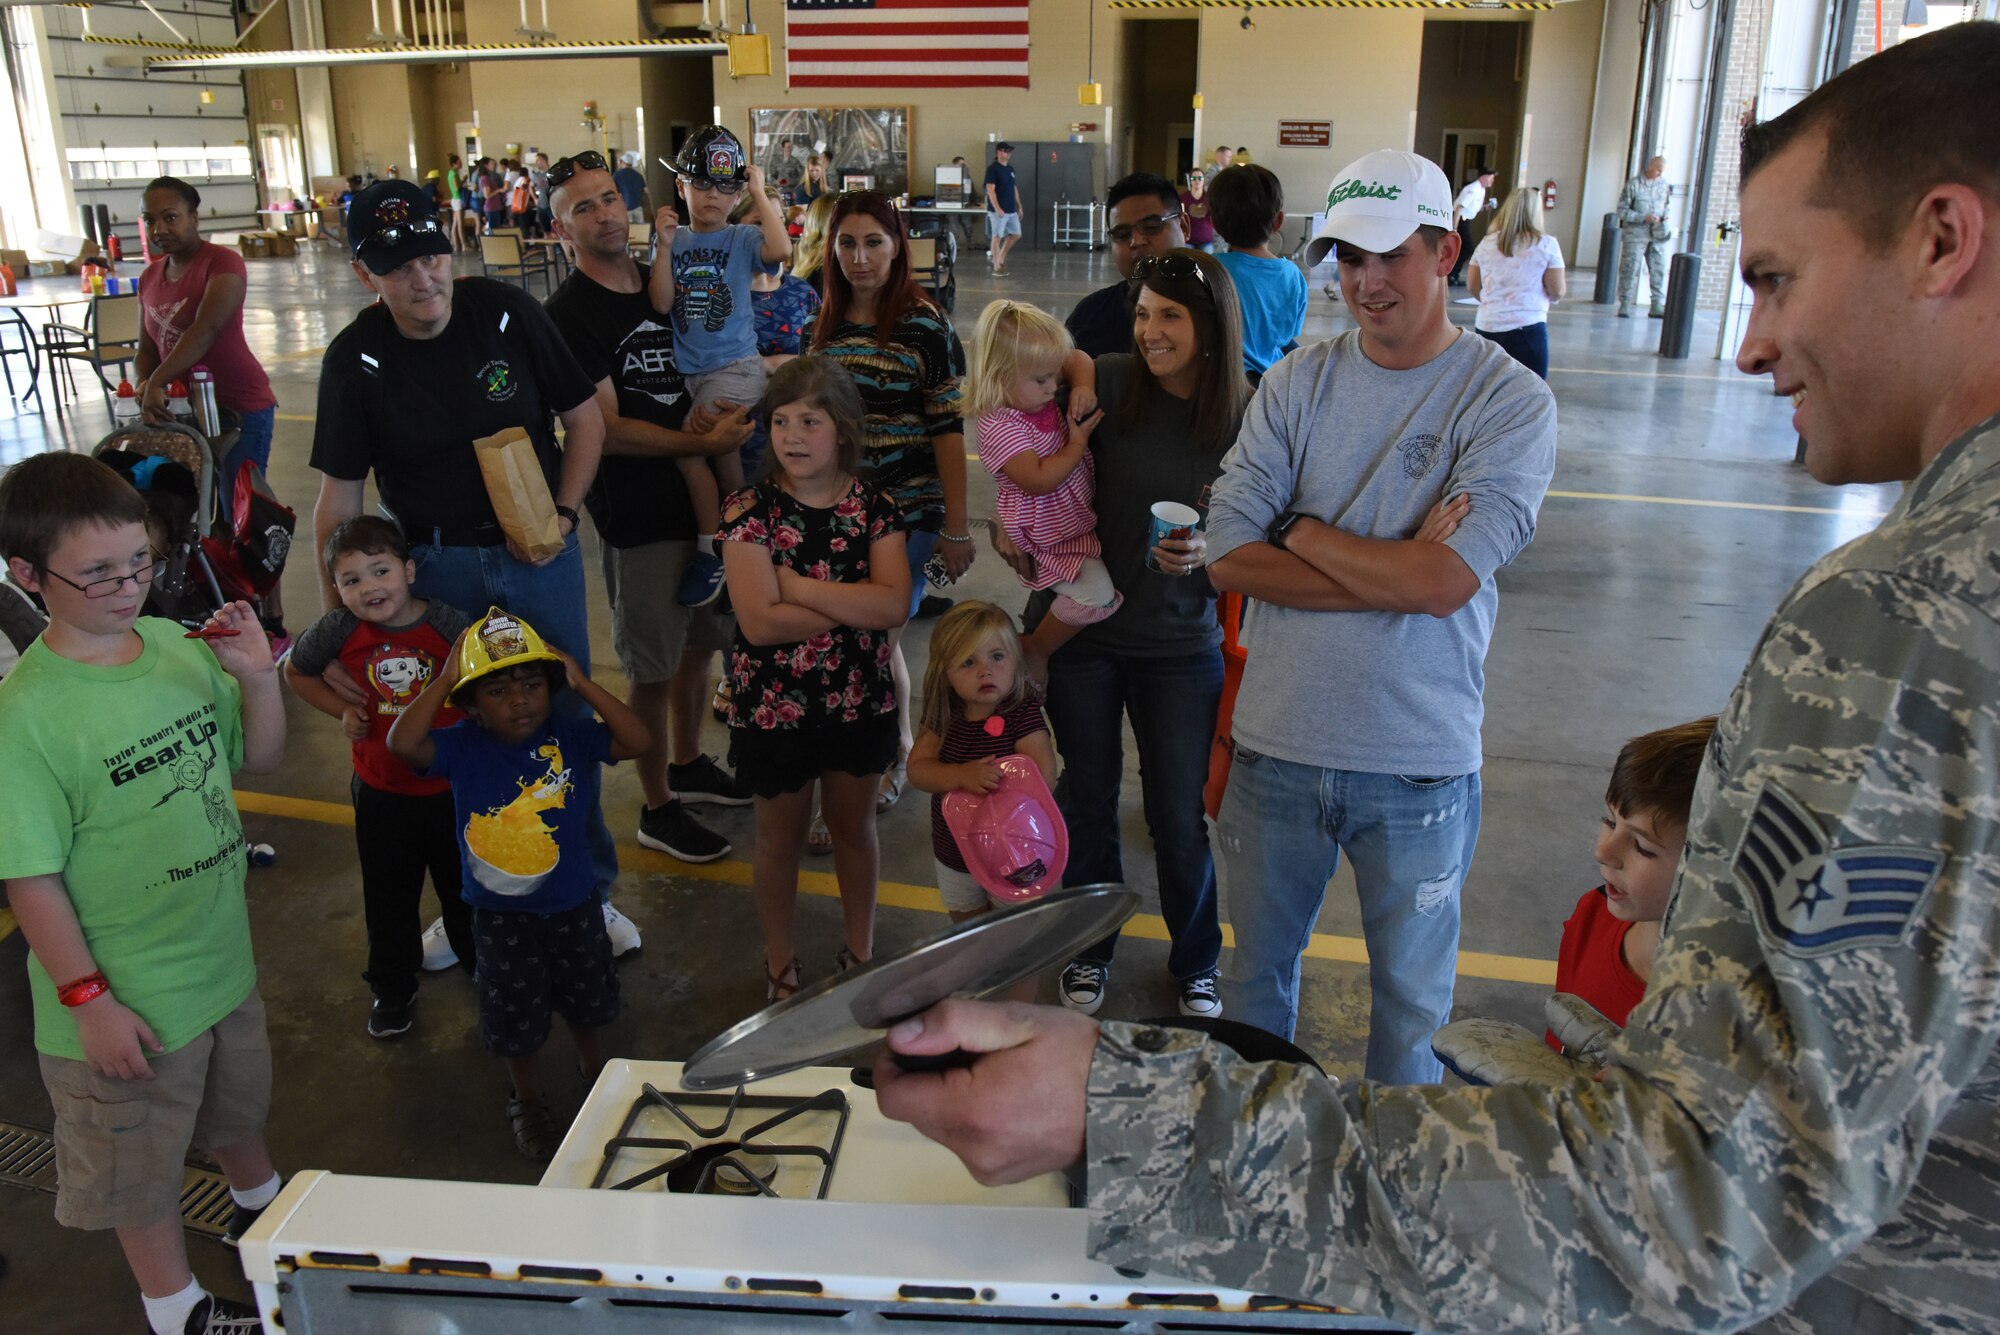 U.S. Air Force Staff Sgt. John Hood, 81st Infrastructure Division firefighter, provides a stove fire safety demonstration during an open house at the fire station at Keesler Air Force Base, Mississippi, Oct. 13, 2018. Keesler celebrated Fire Prevention Week by conducting random fire drills, visiting various facilities with Sparky the Fire Dog, and conducting an open house at the fire department while providing stove and fire extinguisher demonstrations. (U.S. Air Force photo by Kemberly Groue)